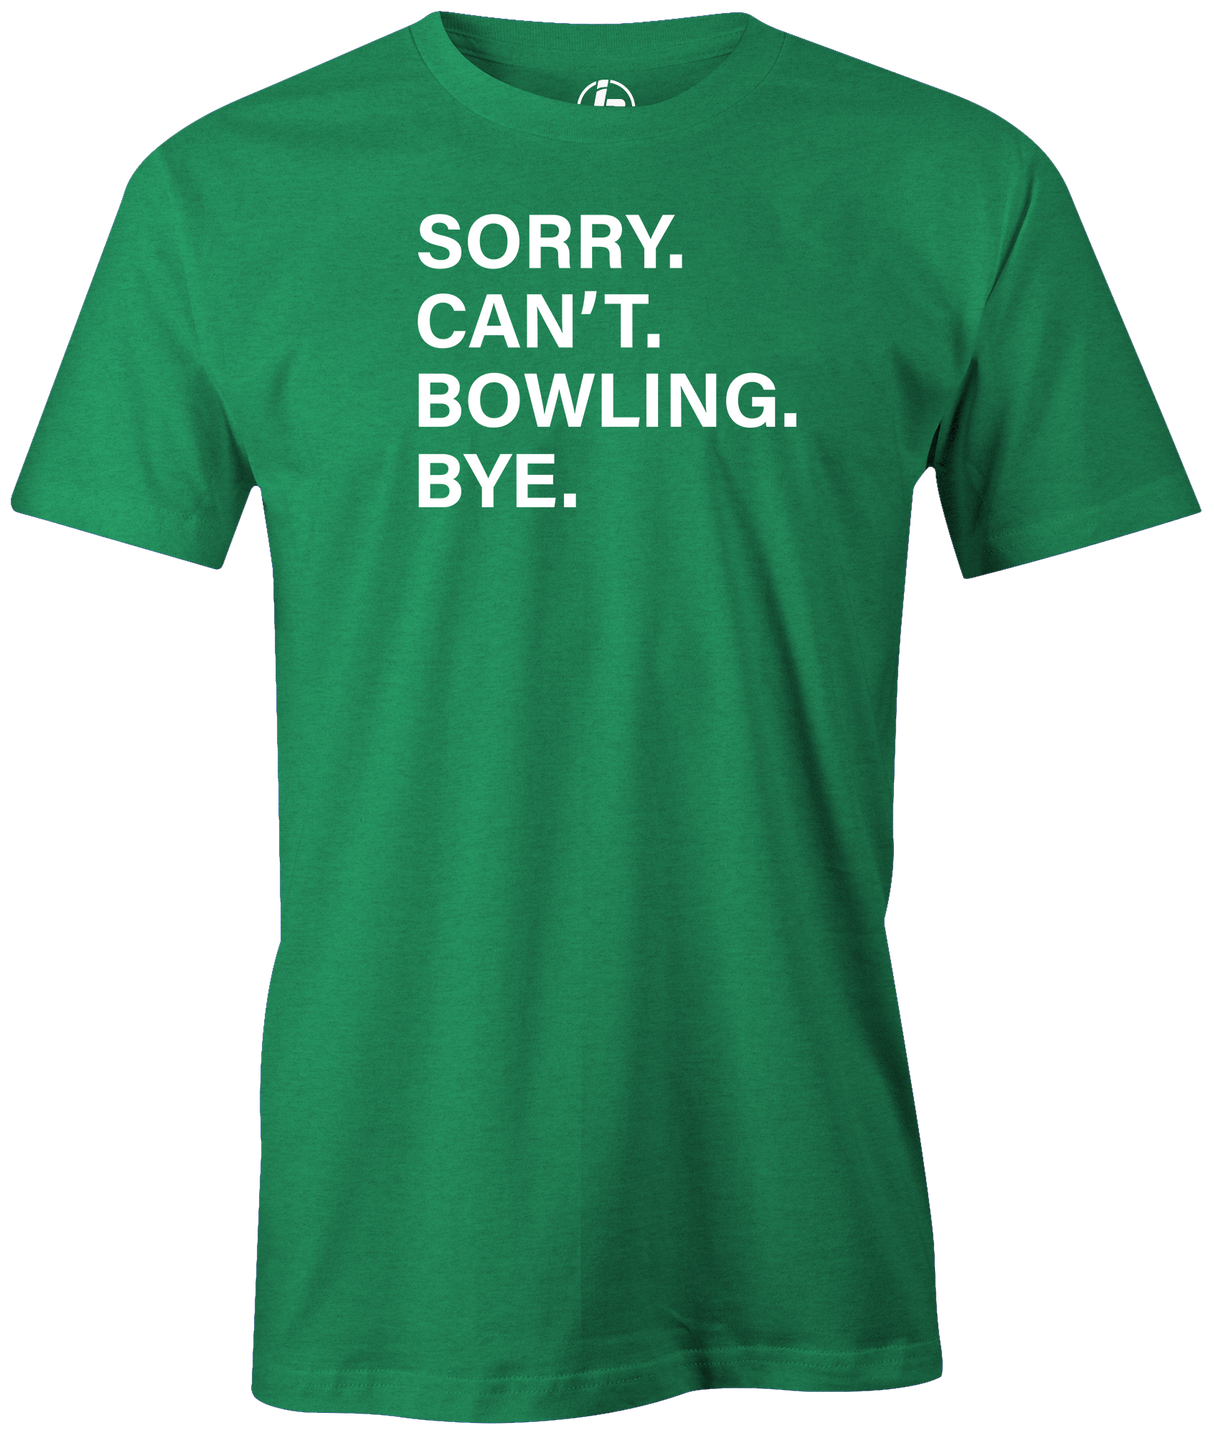 Sorry. Can't. Bowling. Bye.